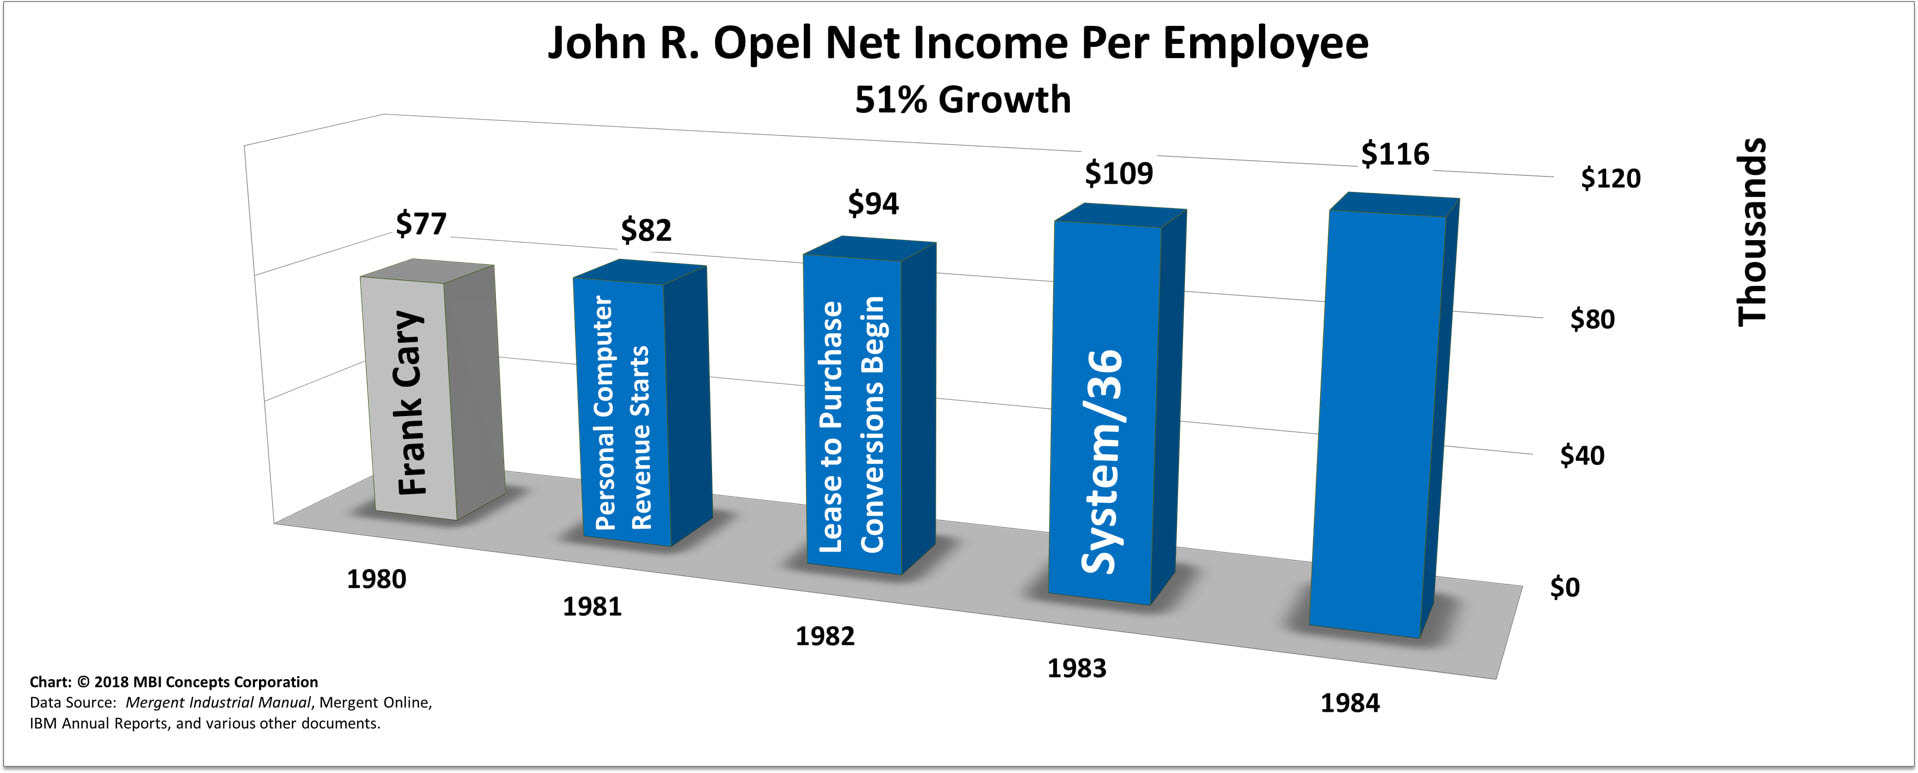 A color bar chart showing IBM's yearly net income (profit) per employee from 1980 to 1984 for IBM Chief Executive Officer John R. Opel.